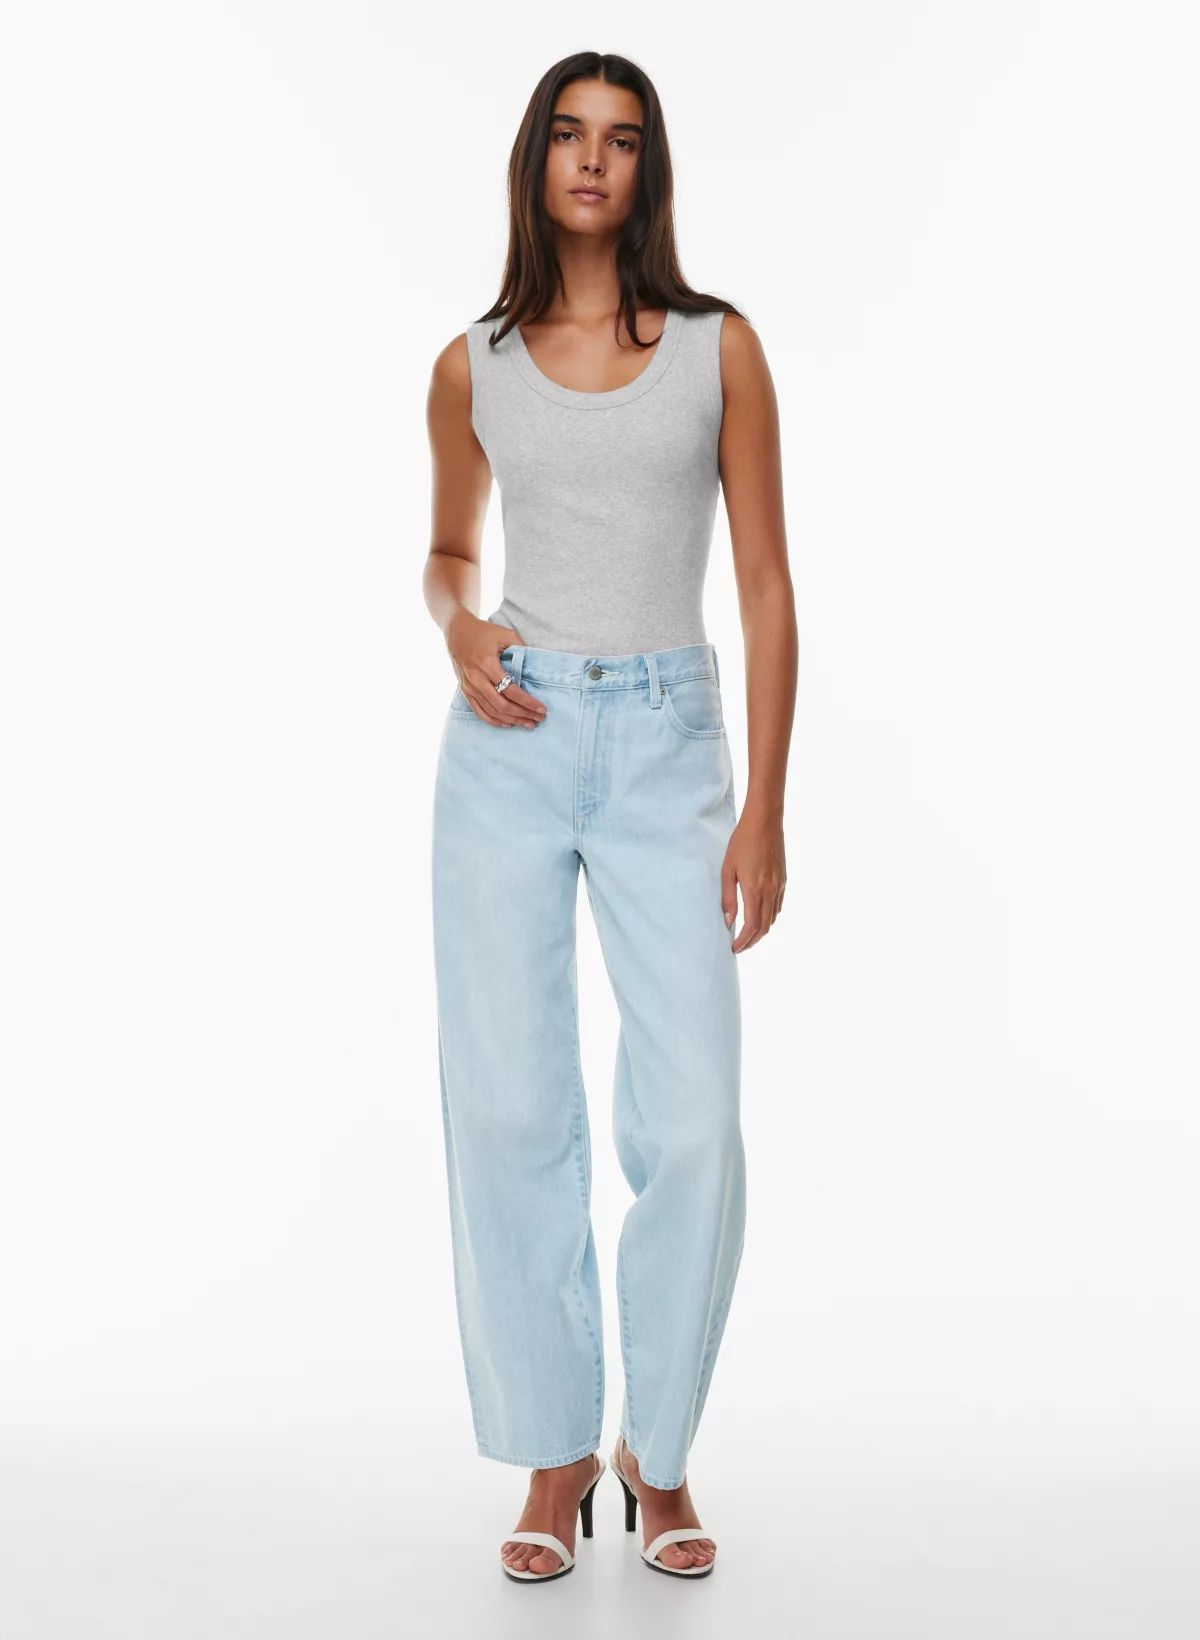 THE ‘90S KATE MID-RISE BAGGY JEAN | Aritzia